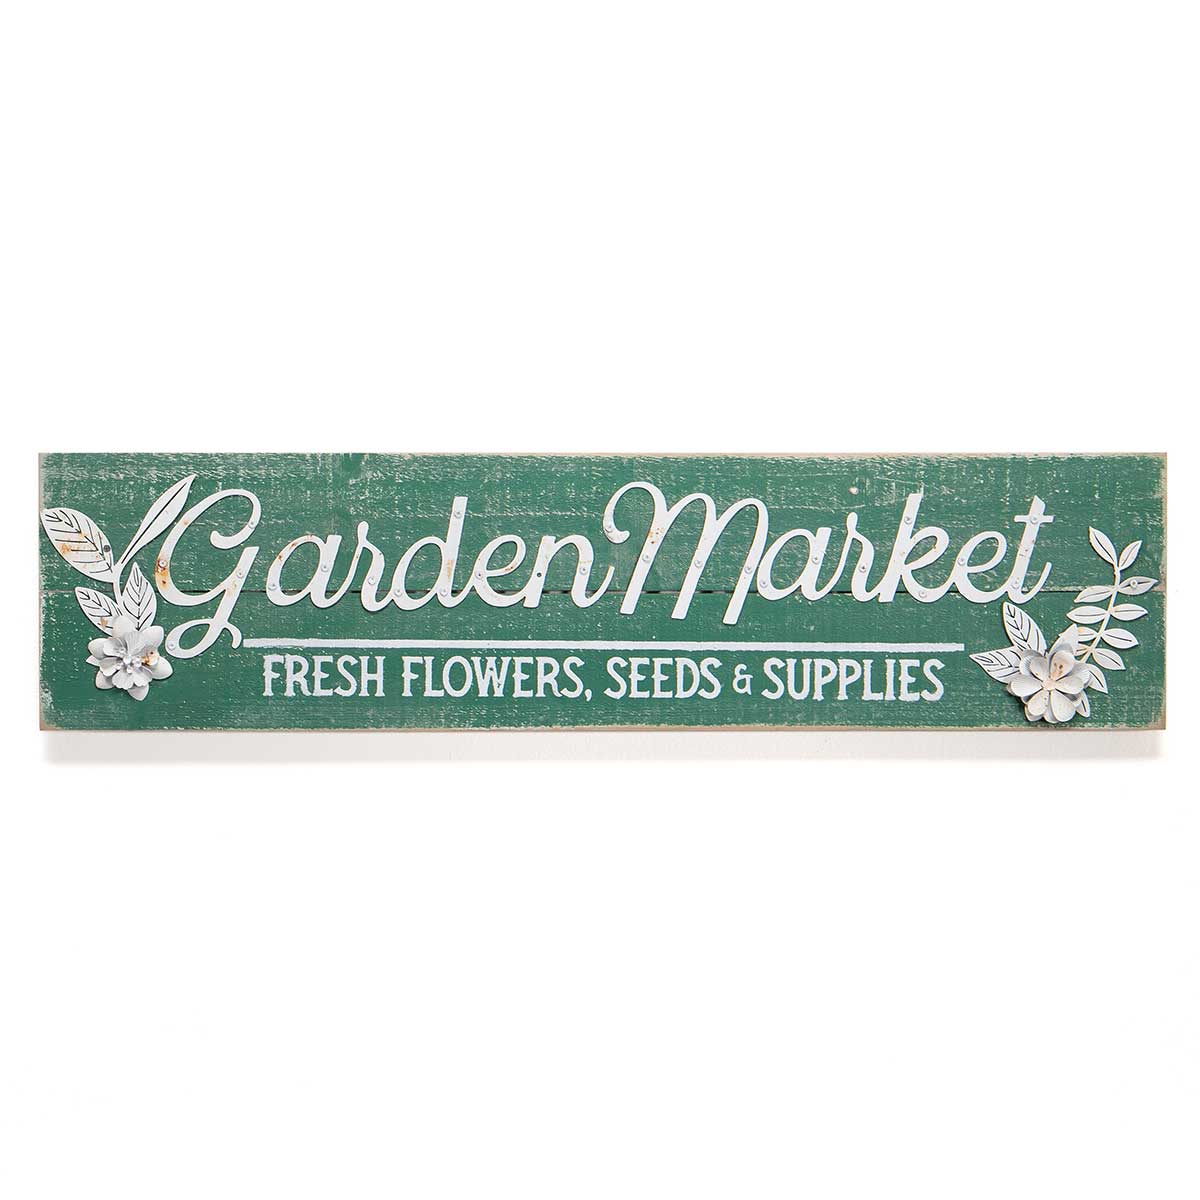 !GARDEN MARKET WOOD & METAL SIGN GREEN/WHITE WITH METAL ff50